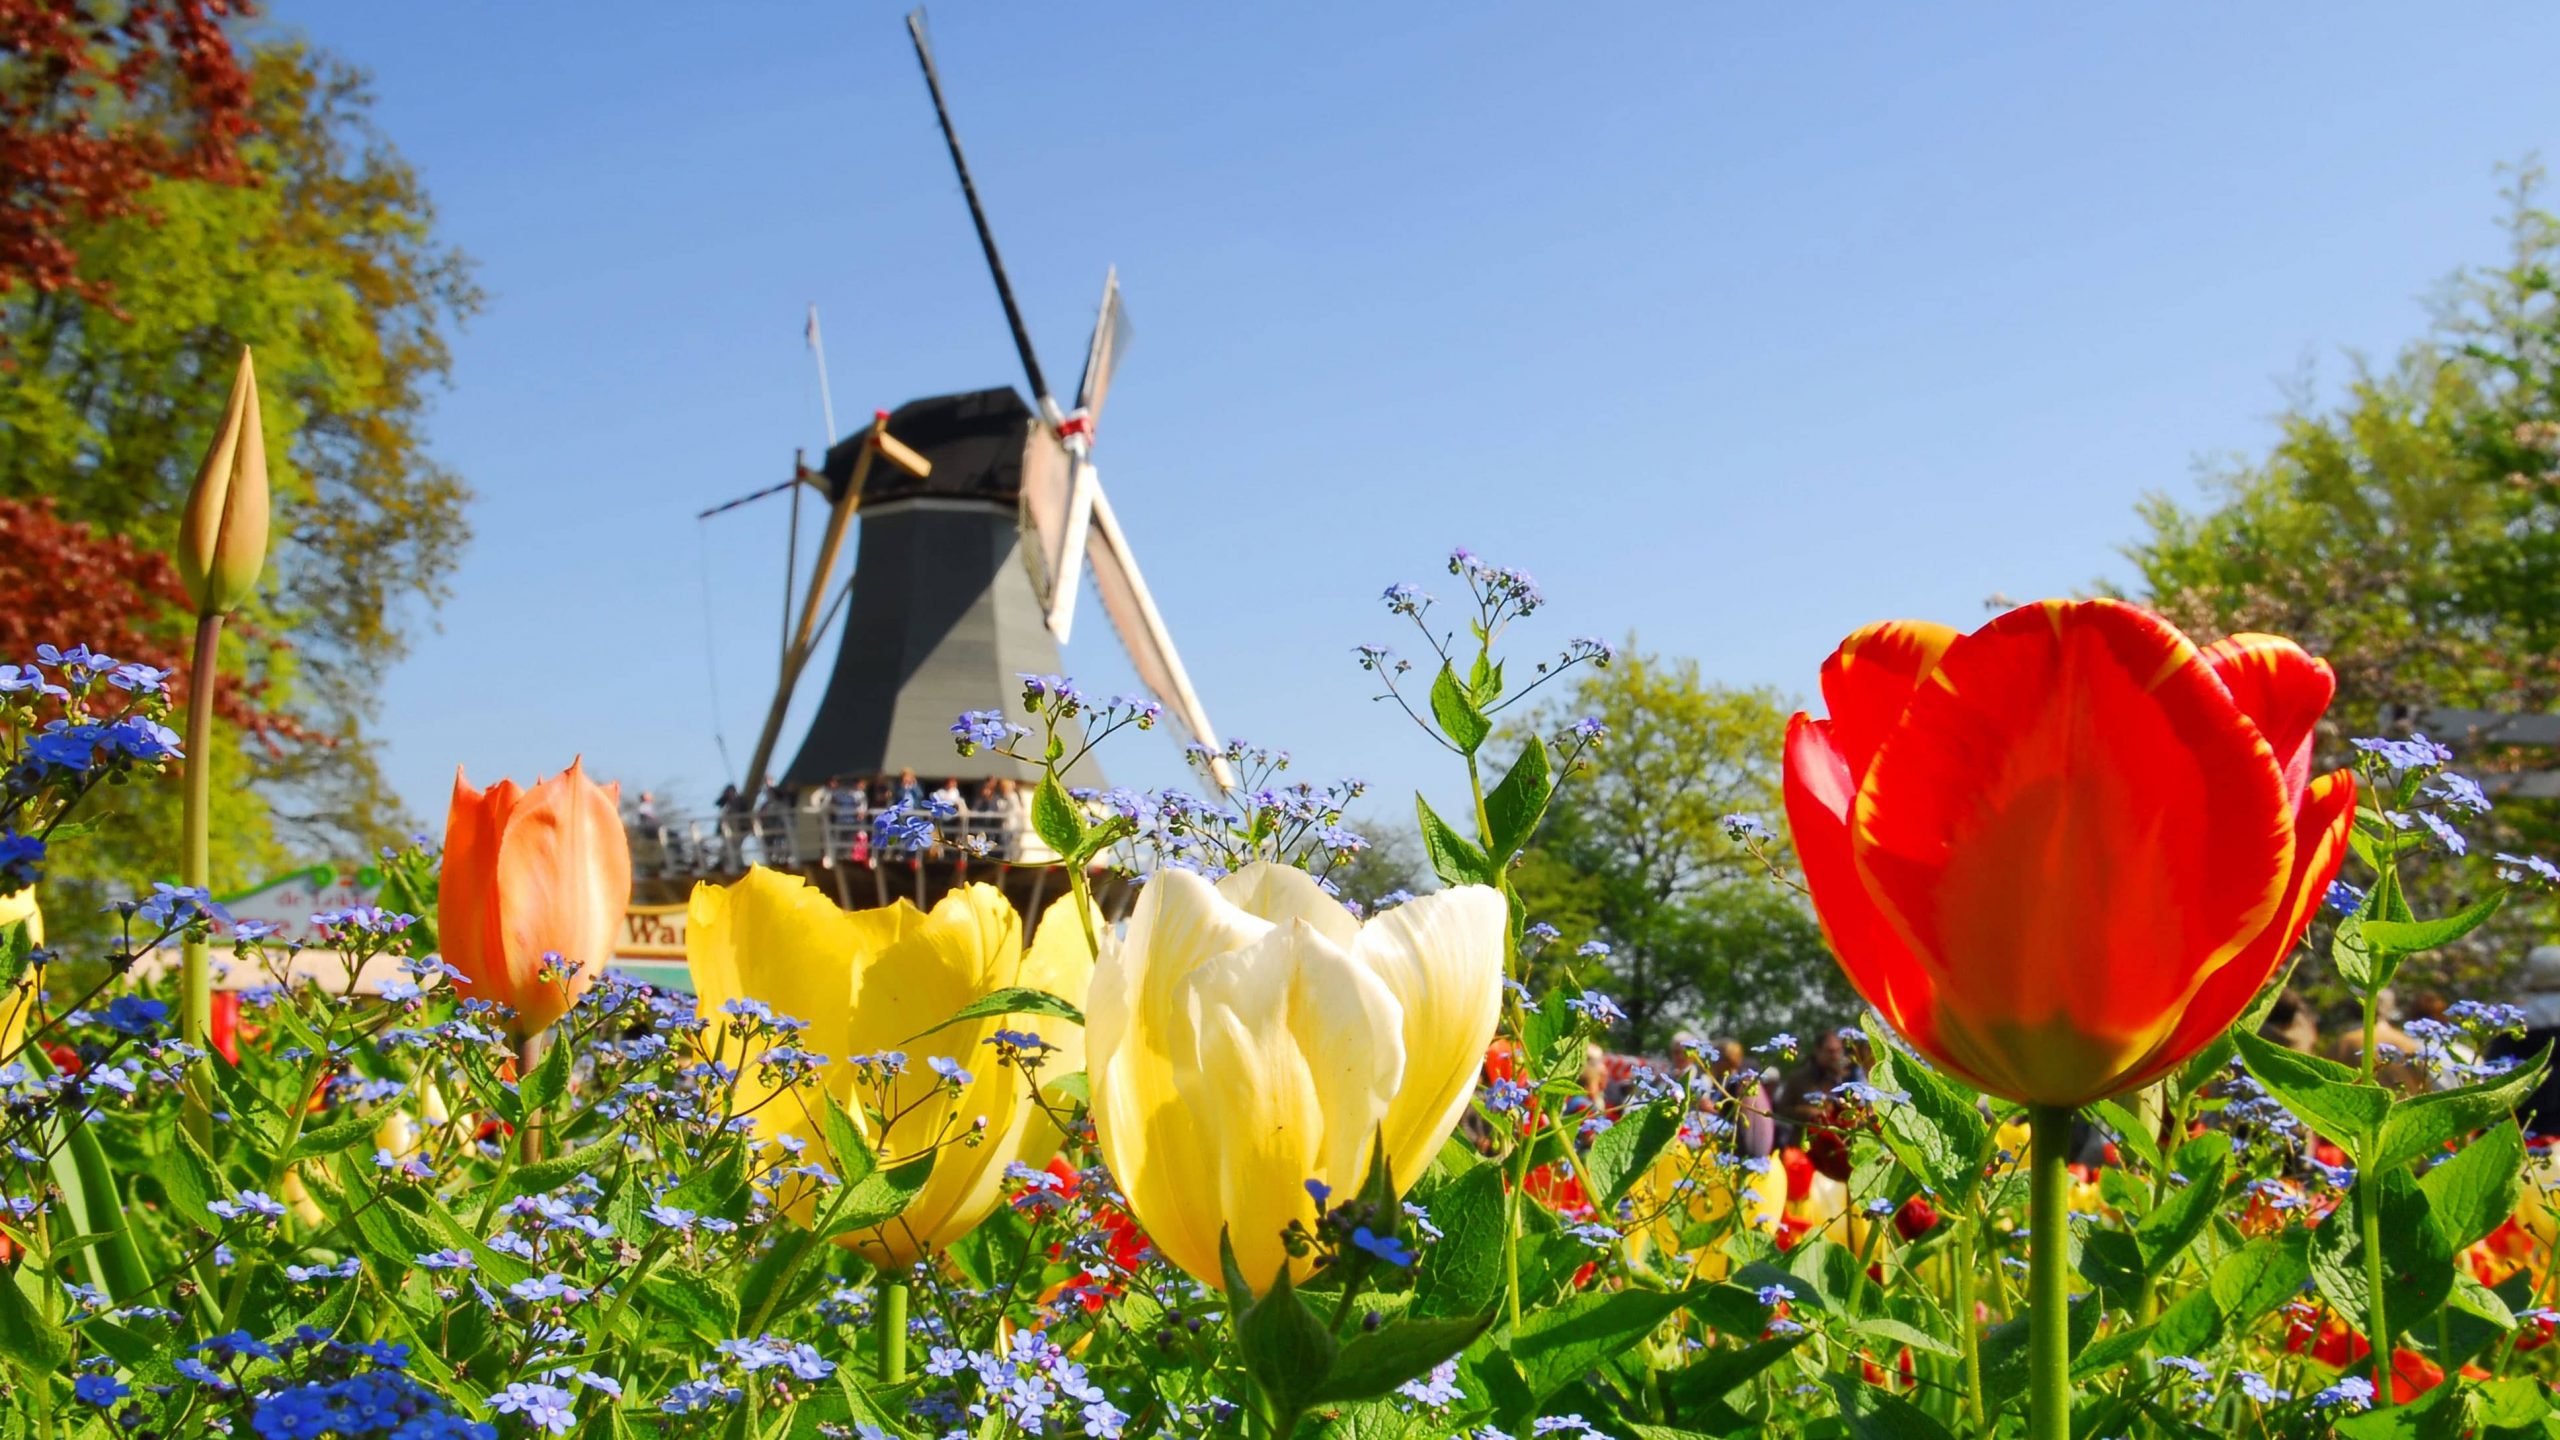 Tulips blooming in front of a windmill in Holland